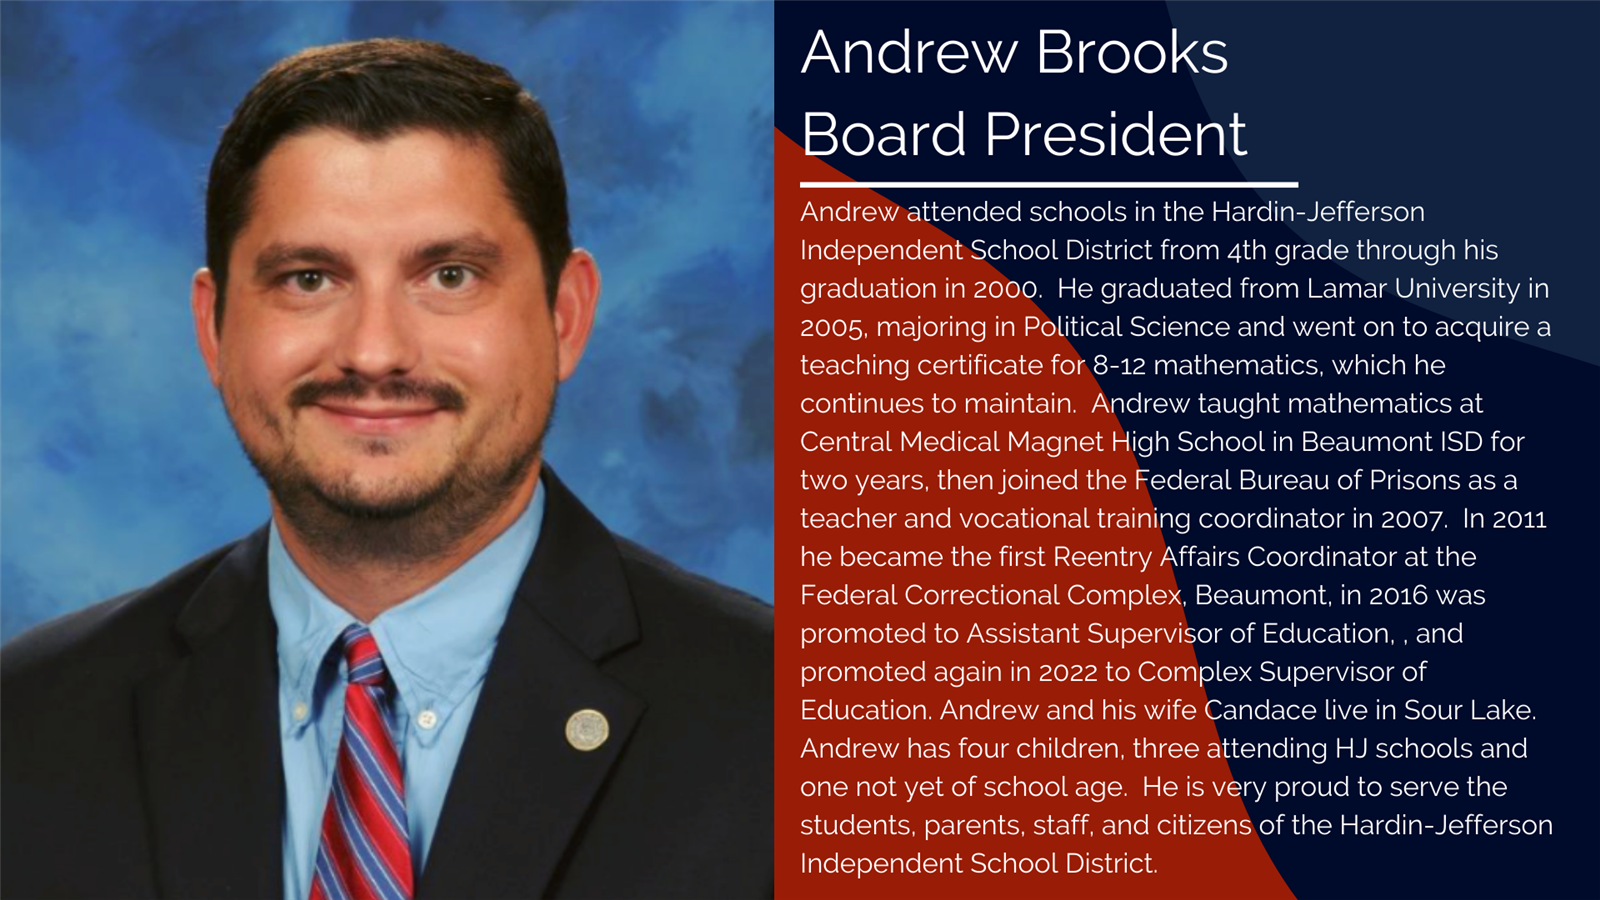 Andrew attended schools in the Hardin-Jefferson Independent School District from 4th grade through his graduation in 2000.  H